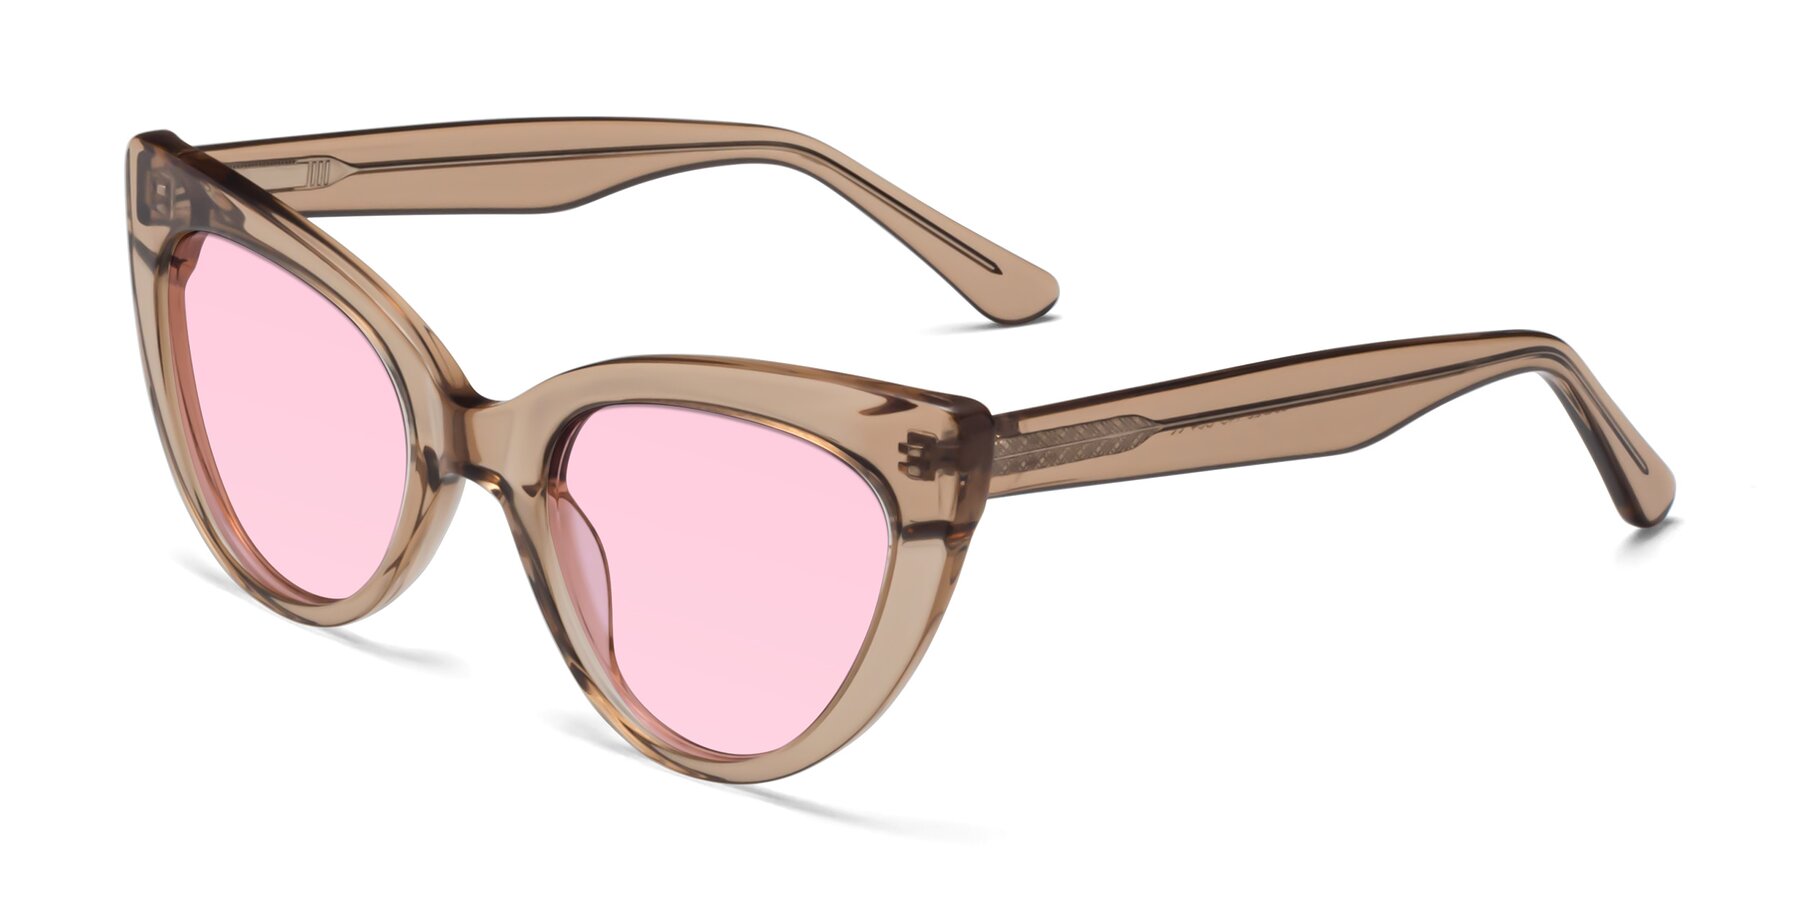 Angle of Tiesi in Caramel with Light Pink Tinted Lenses